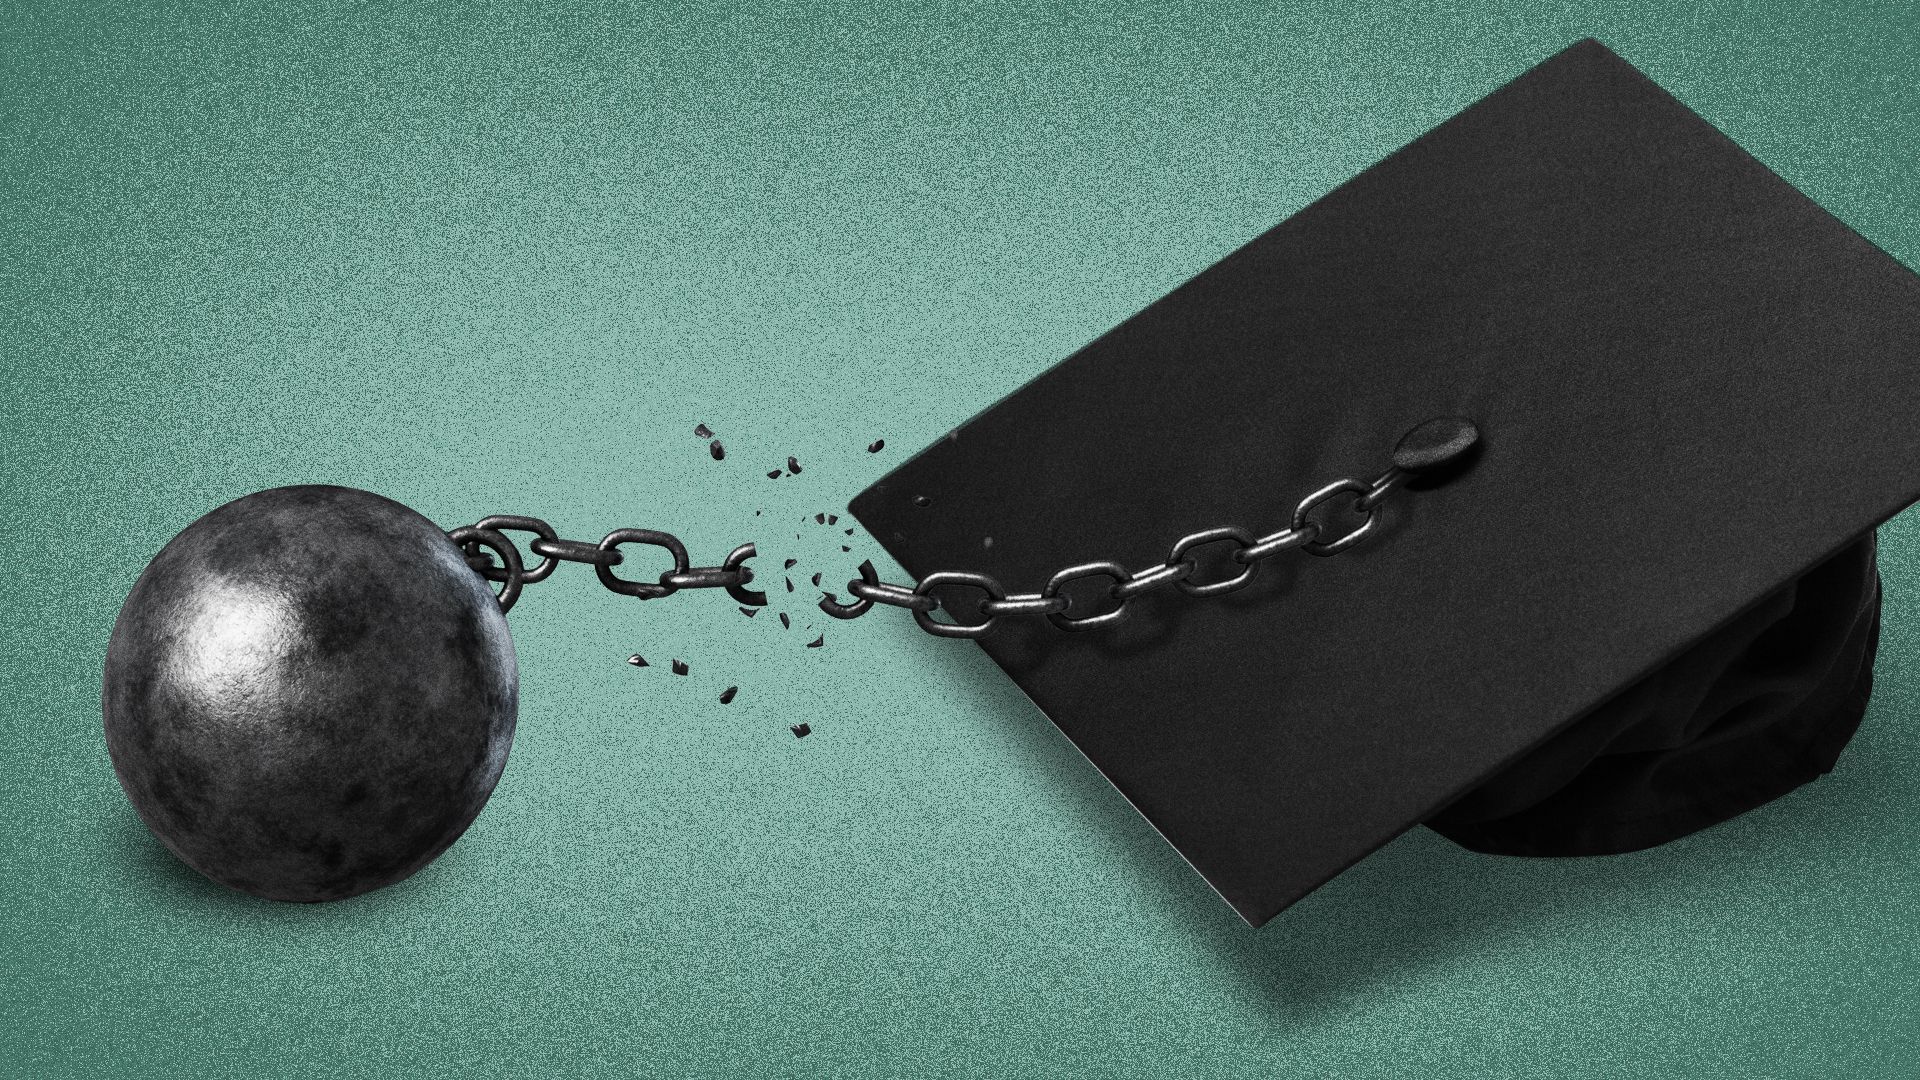 Illustration of a ball and chain attached to a graduation cap